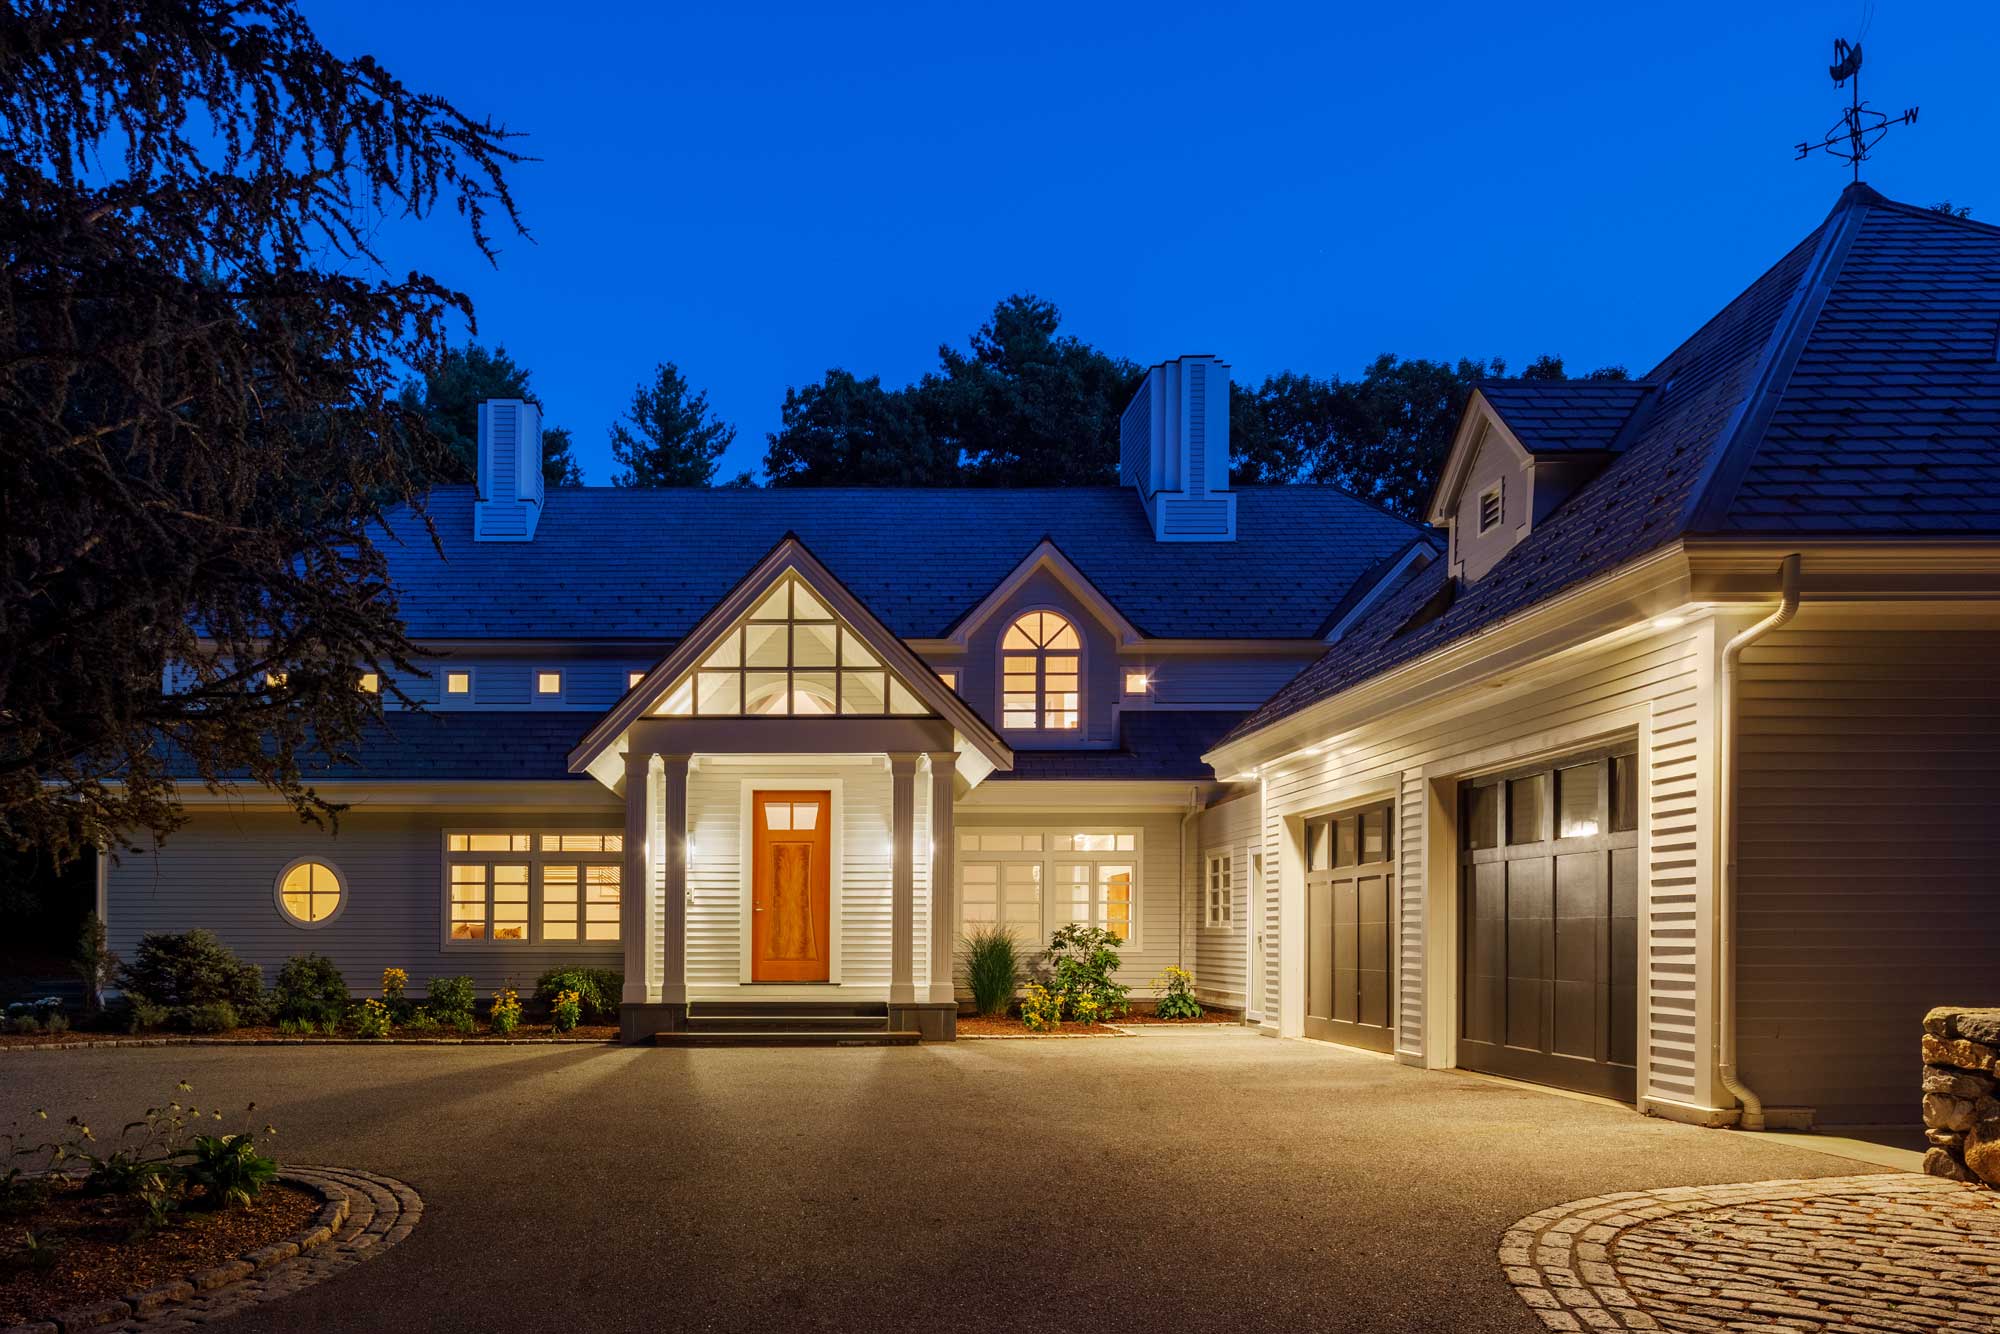 Single-story home with large driveway and two-car garage